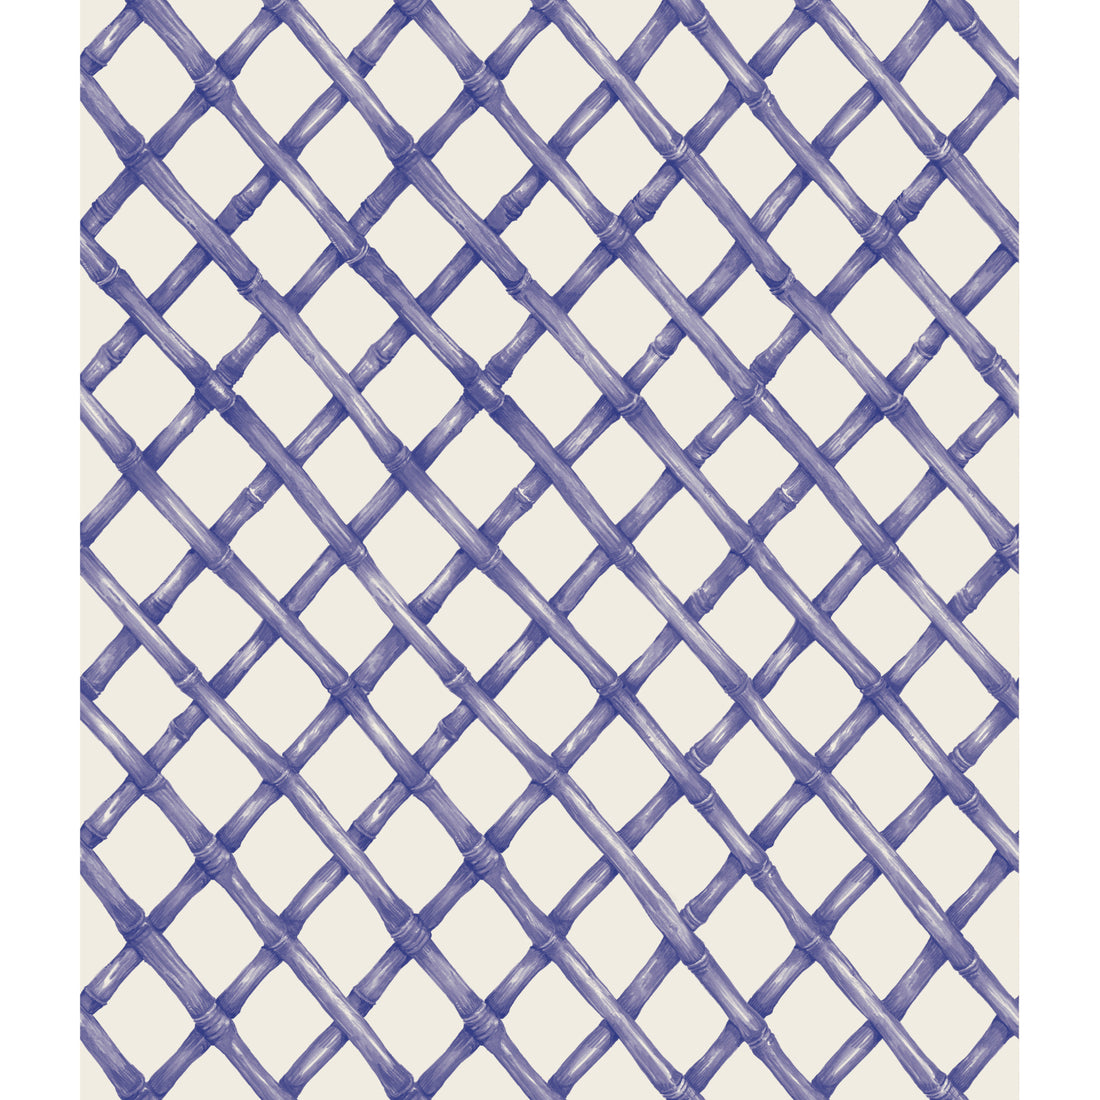 Hester &amp; Cook Blue Lattice Wallpaper featuring a diagonal crisscross pattern with lines on a light background, designed to be mold and mildew resistant.